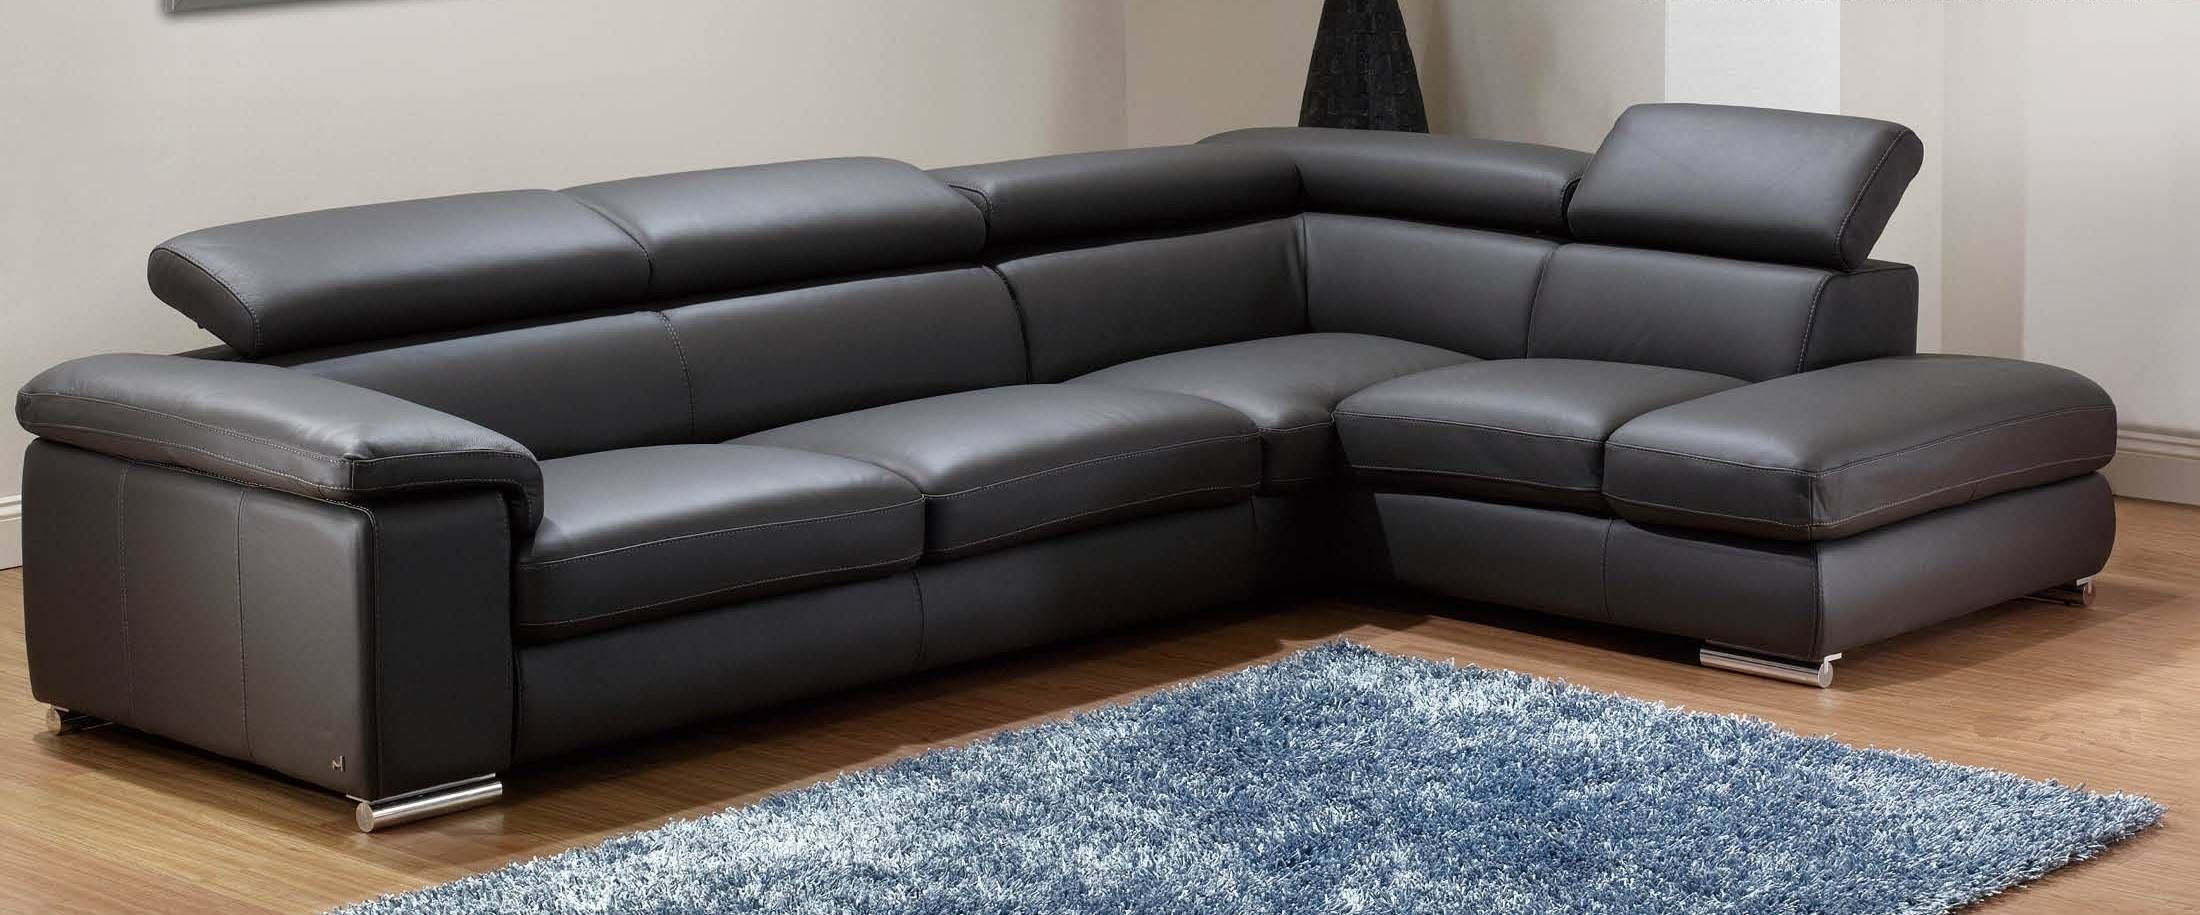 Furniture: Comfortable Modern Sofa Design With Cozy Armless Settee With Backless Sectional Sofa (View 11 of 30)